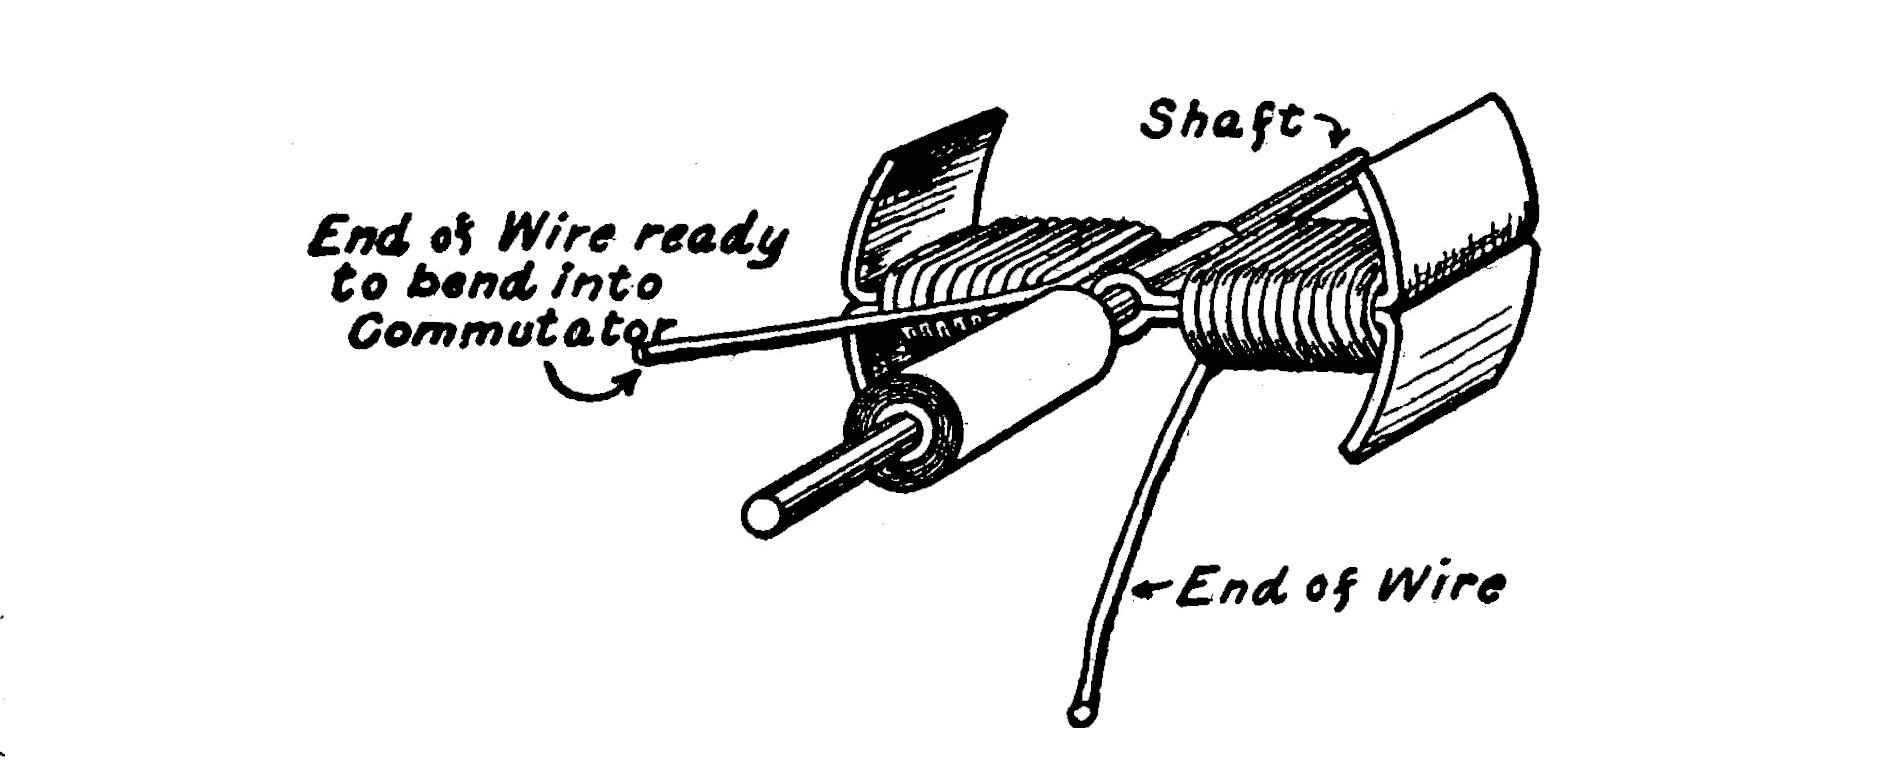 FIG. 16.—The Armature Winding before the Commutator is completed.